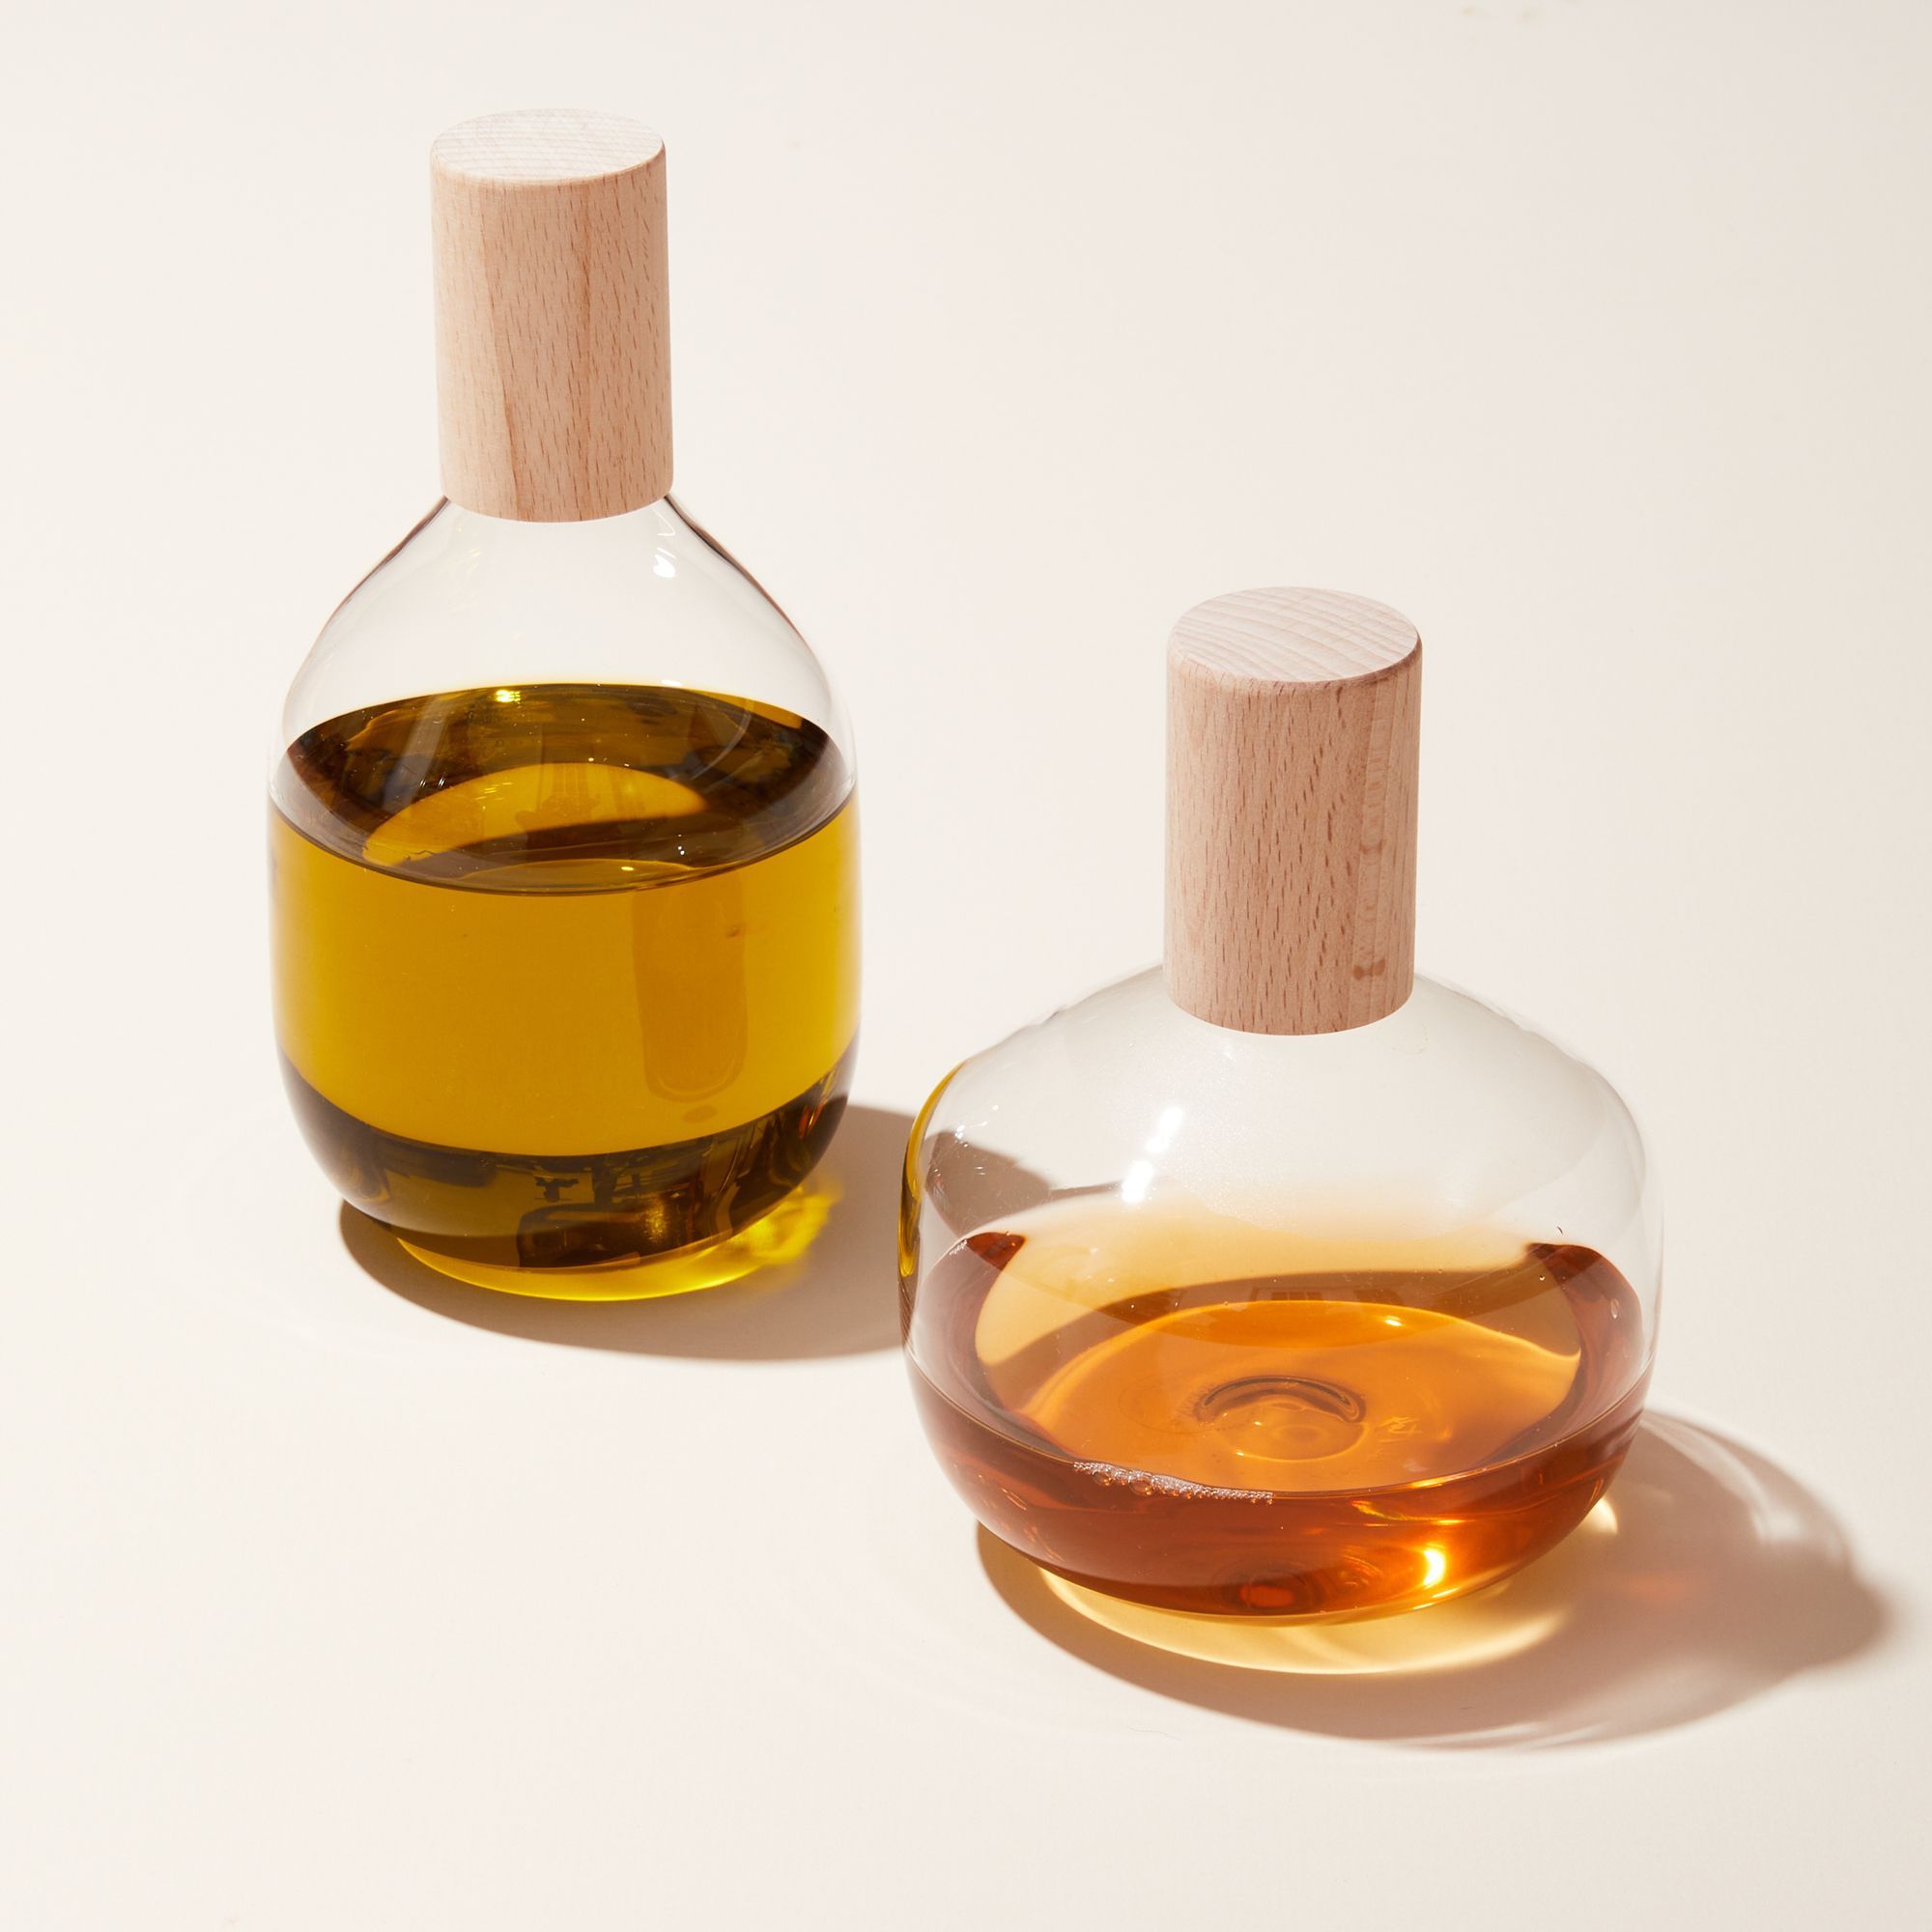 2 Glass olive oil cruets with cylindrical wood tops. The cruet on the left is tall and wide, the cruet on the right is short and wider. Each are filled with a type of cooking oil.